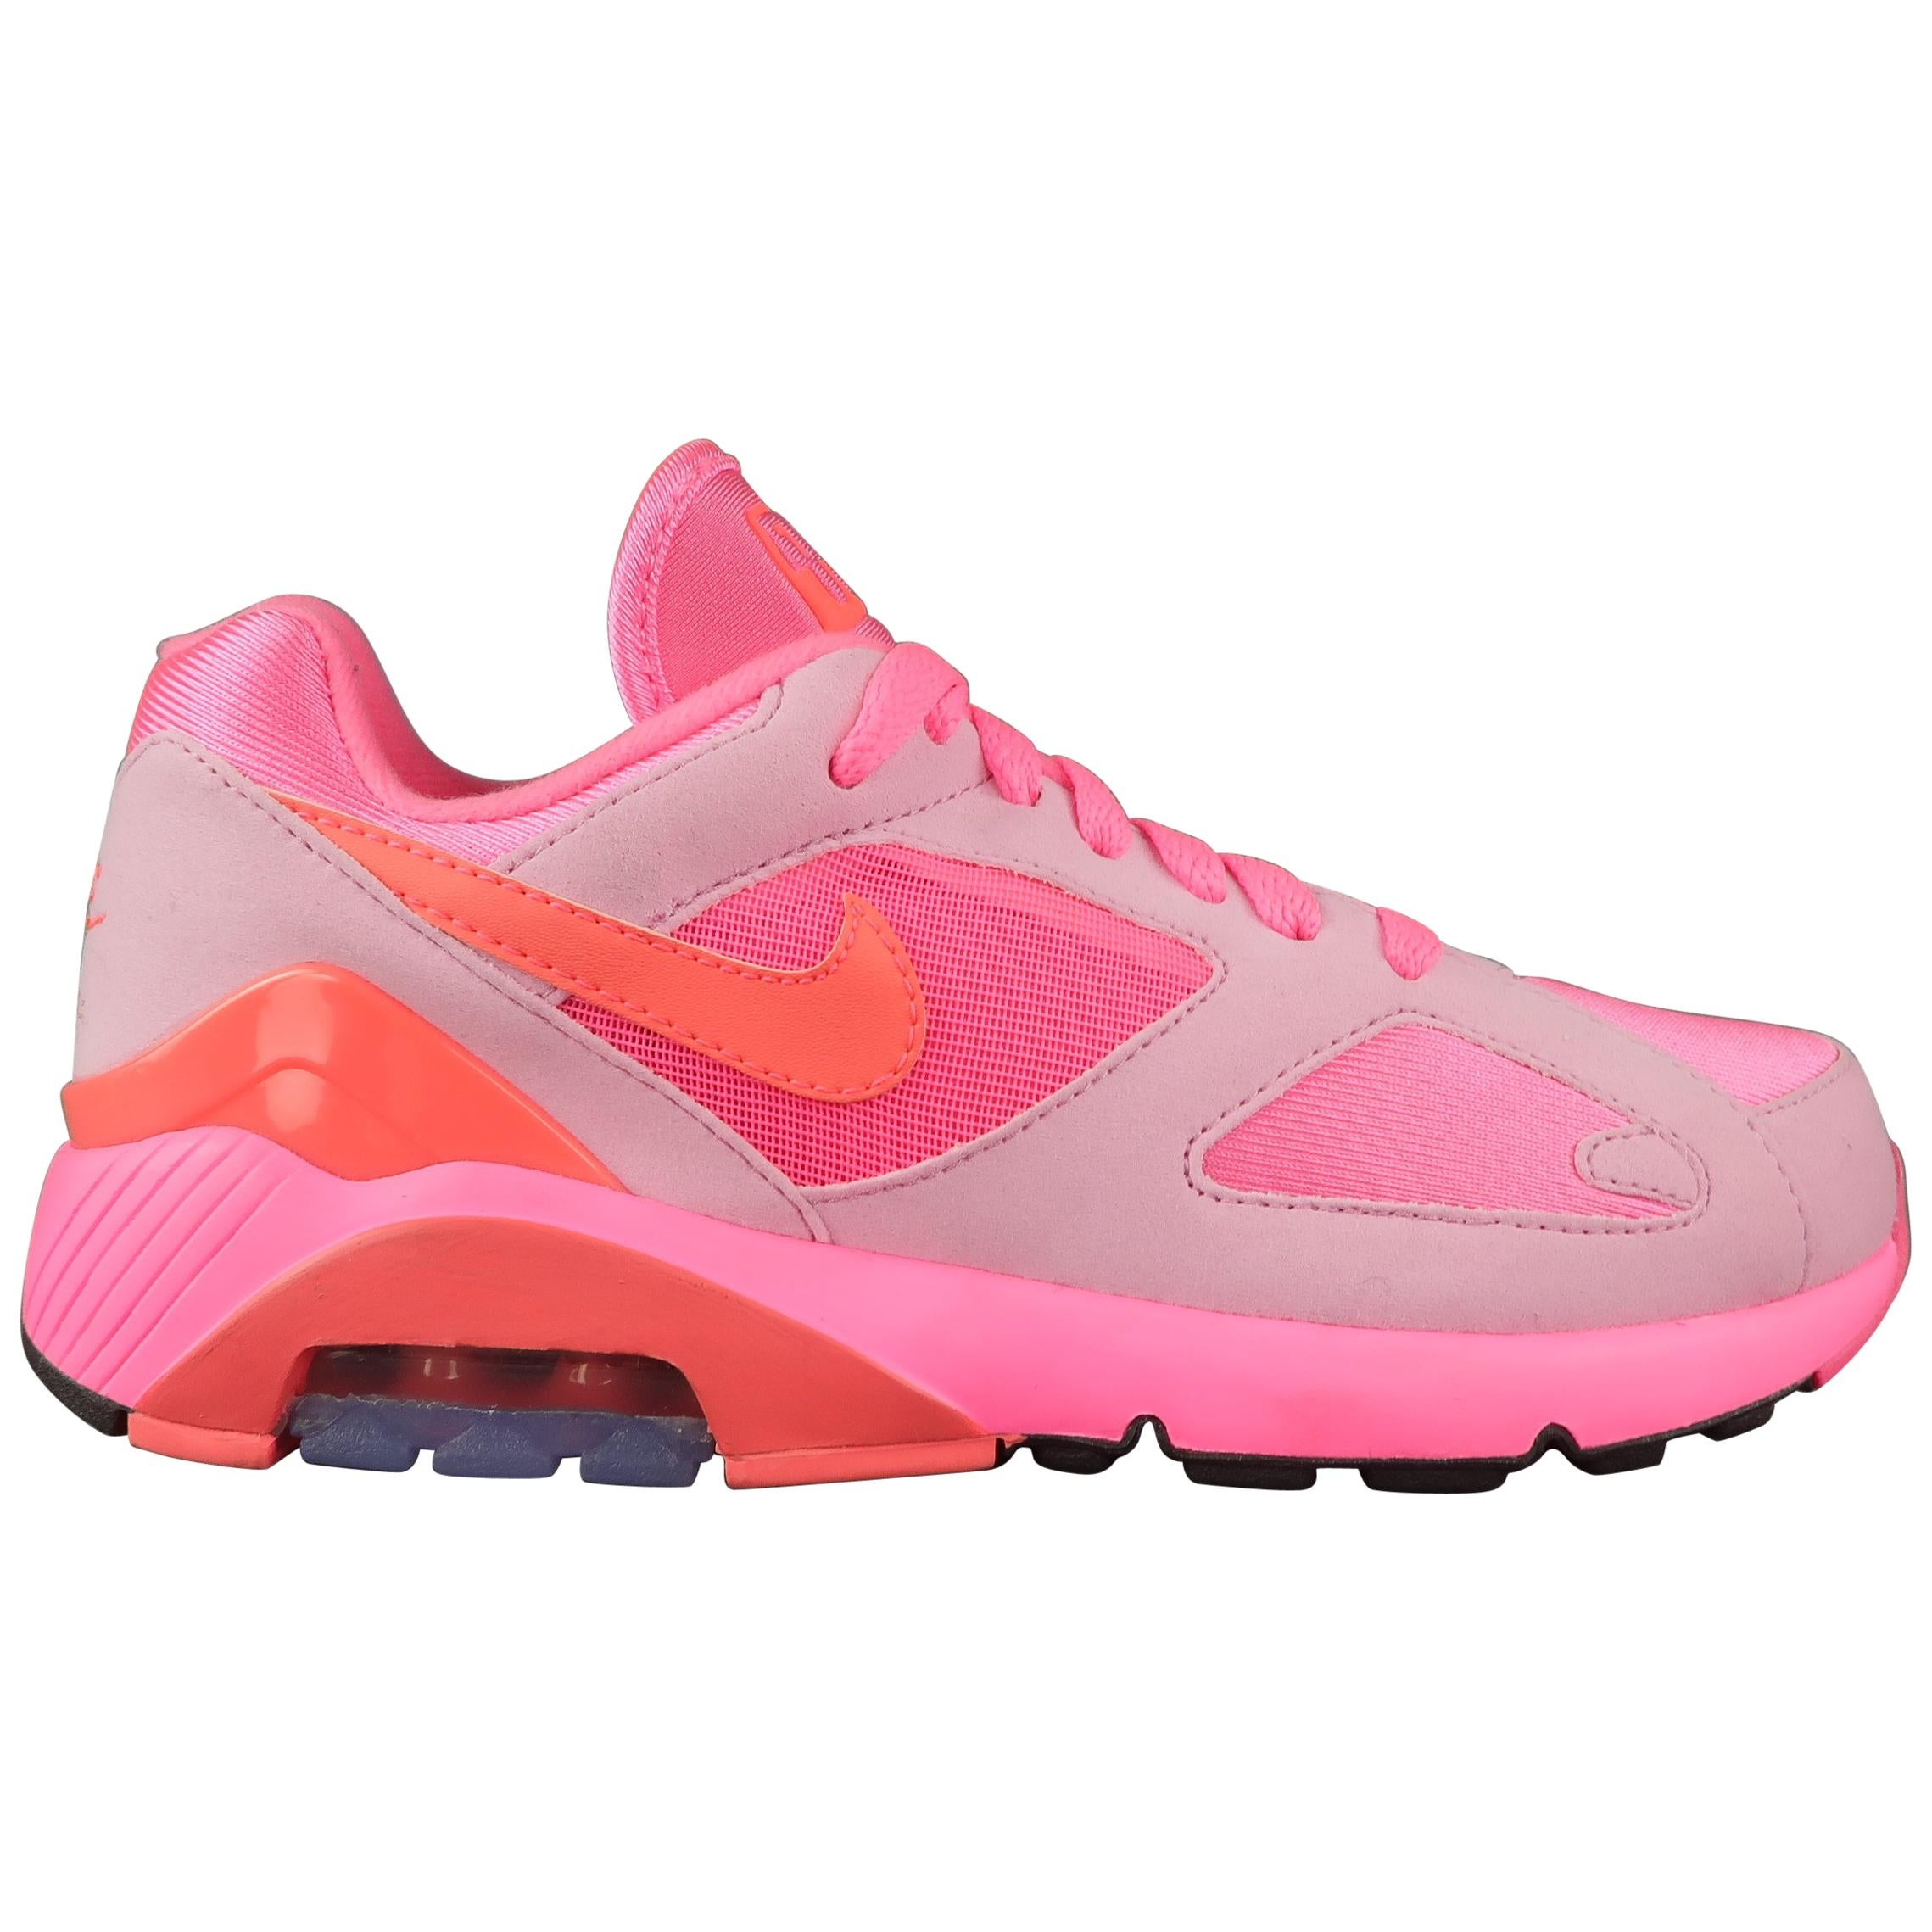 COMME des GARCONS Nike Size 5.5 Neon Pink Nylon Air Max 180 Sneakers Trainers